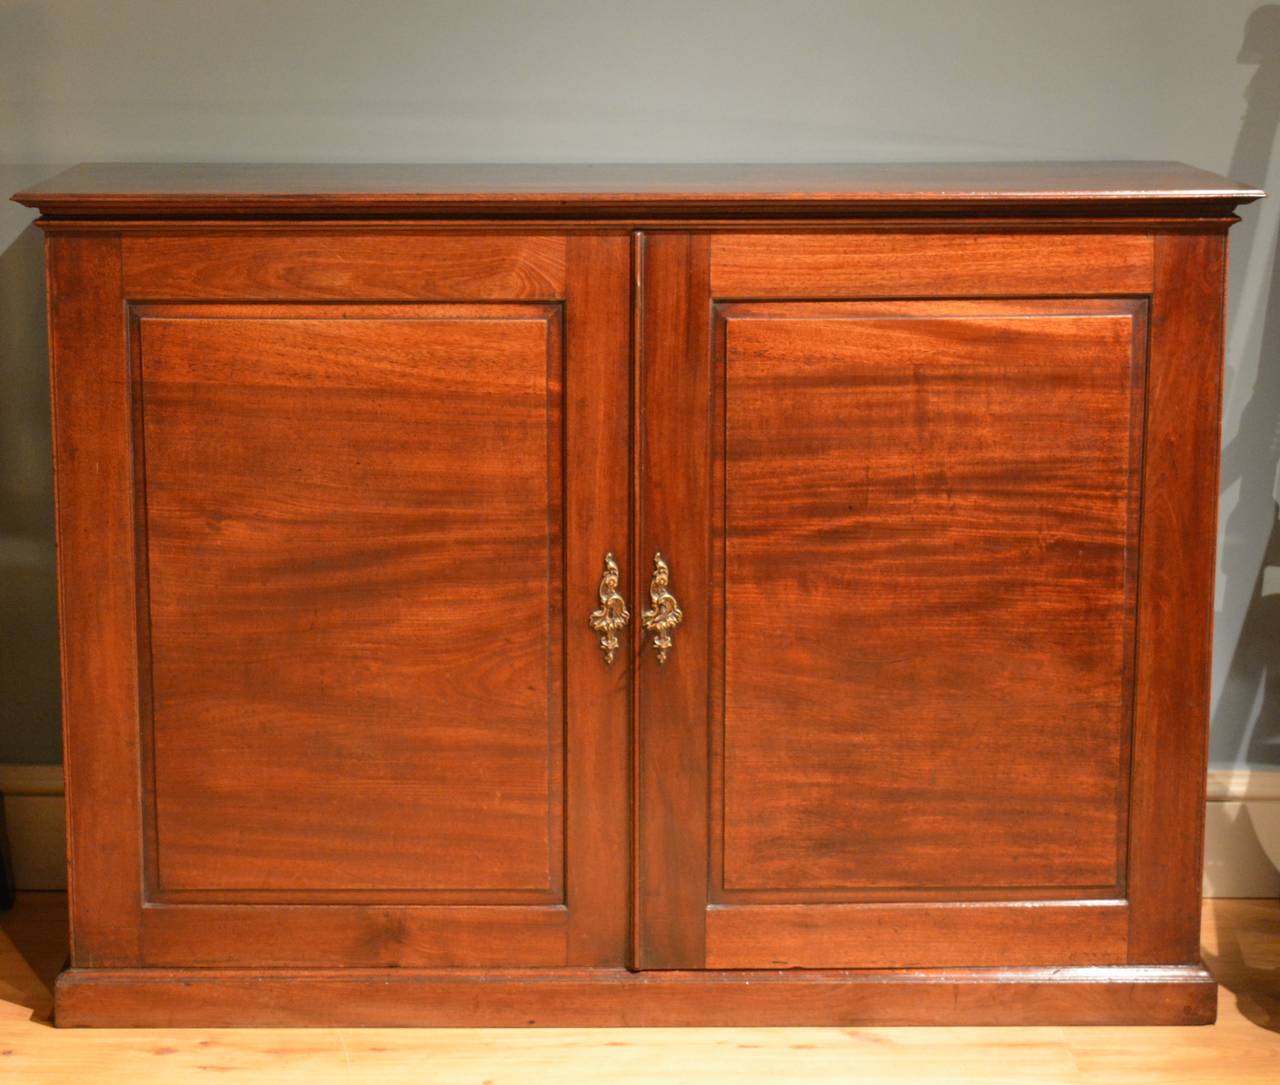 A George III mahogany two-door side cabinet, the fielded panel doors having their original Rococo escutcheons, the top and base moulds finely shaped standing on a plinth, the interior containing two adjustable shelves. This piece has particularly